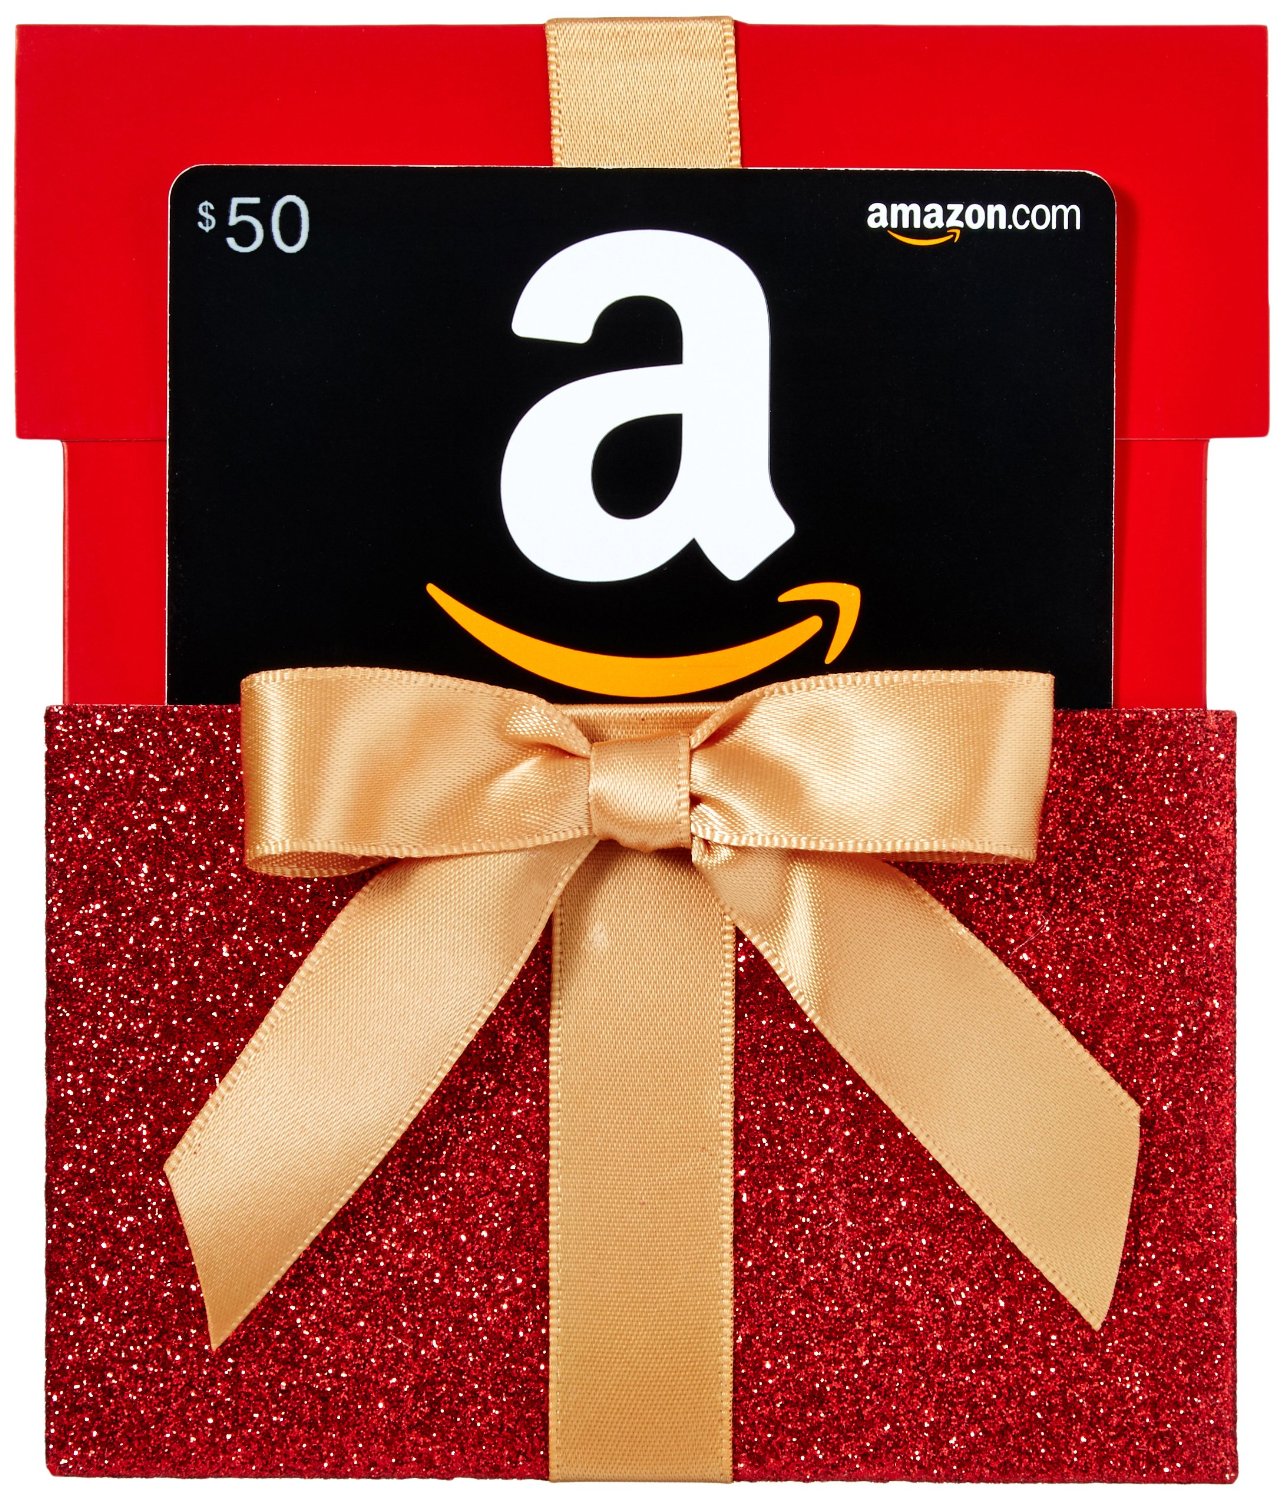 amazon-gift-voucher-expertly-chosen-gifts